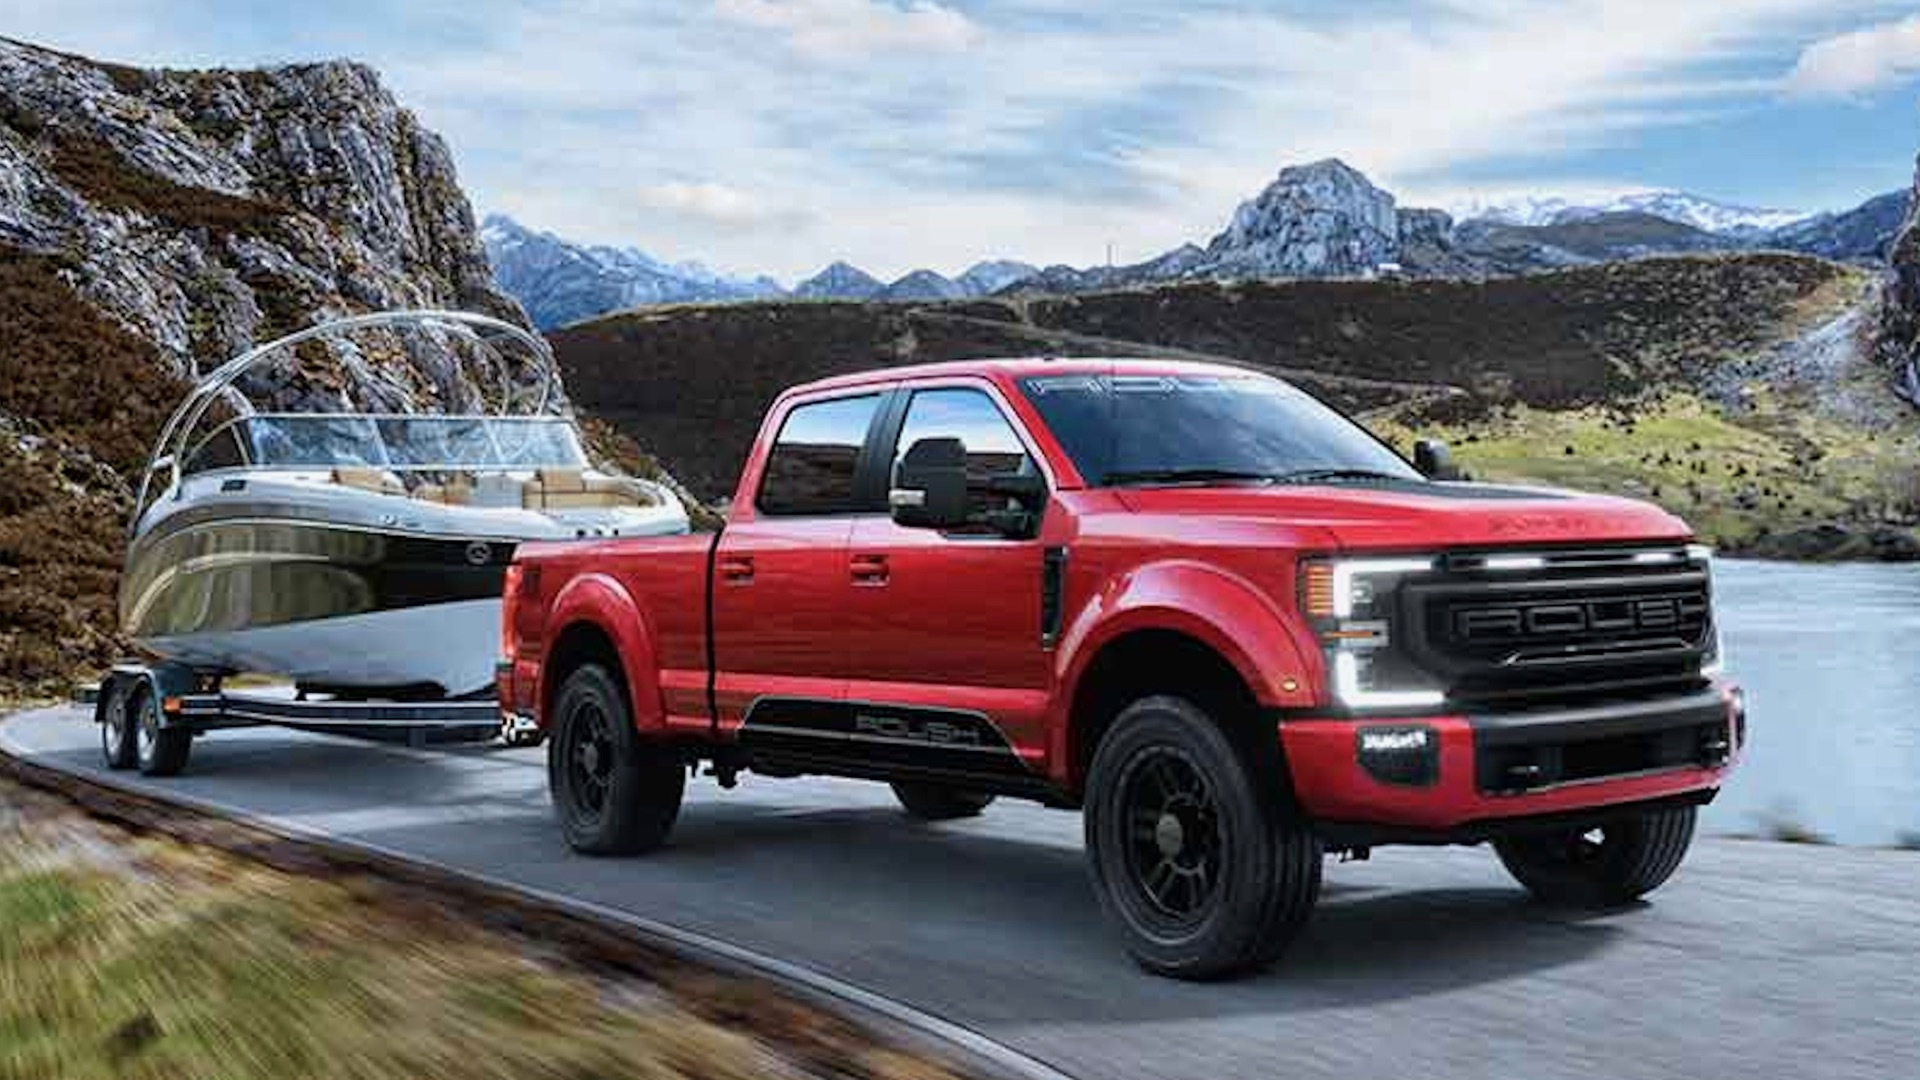 2021 Ford Super Duty Gets Roush Styling Suspension Upgrades Betway必威体育注册